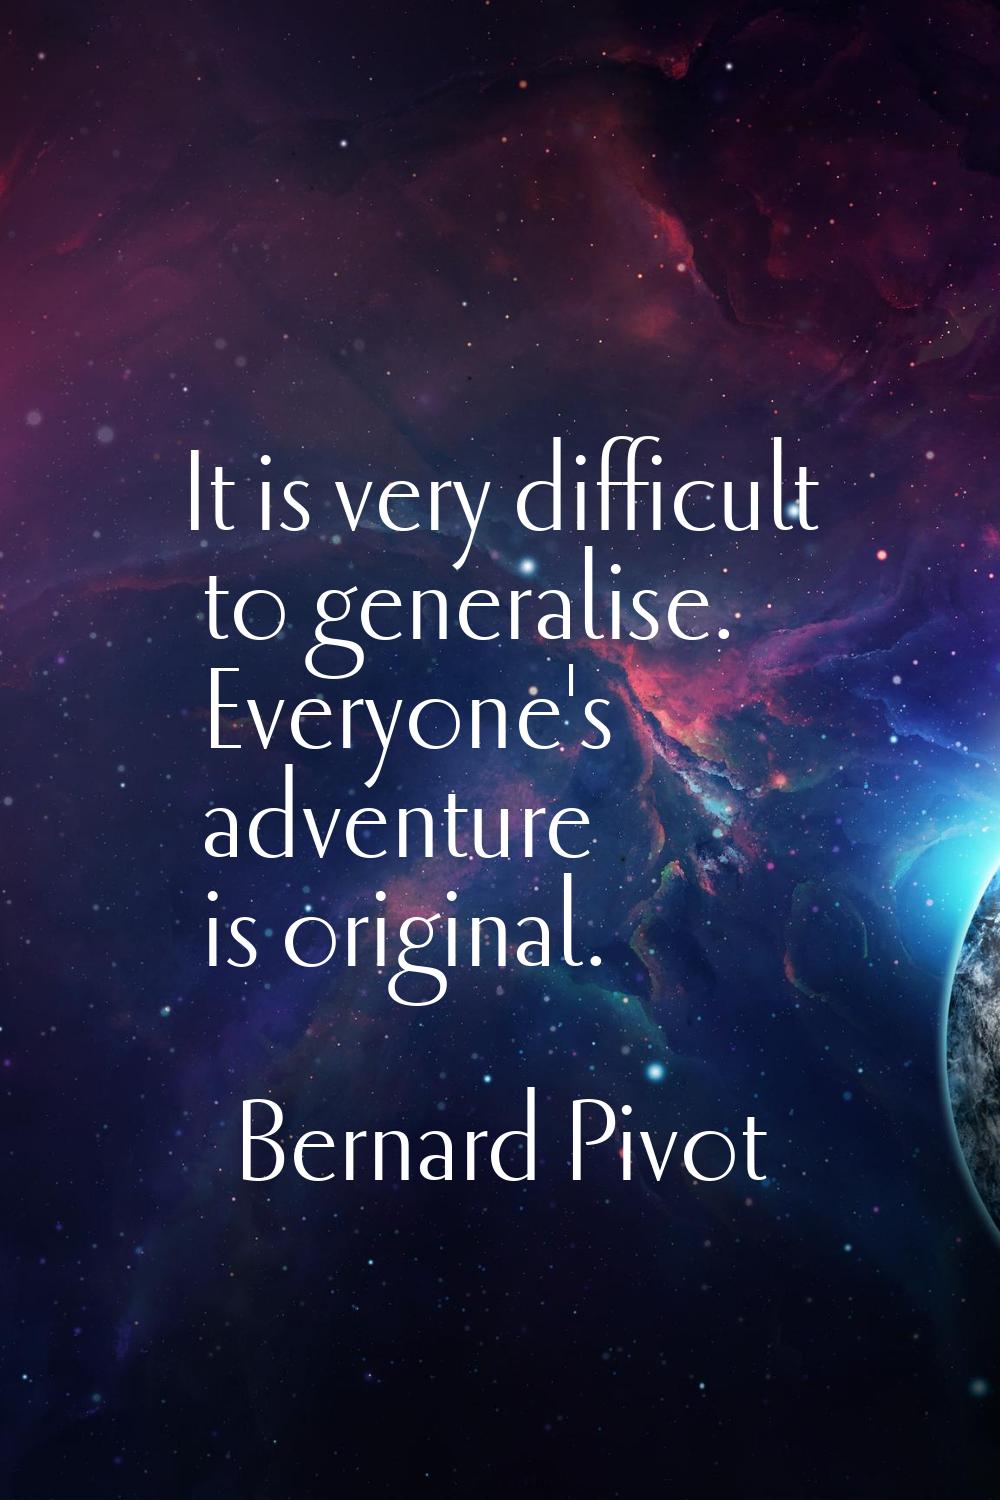 It is very difficult to generalise. Everyone's adventure is original.